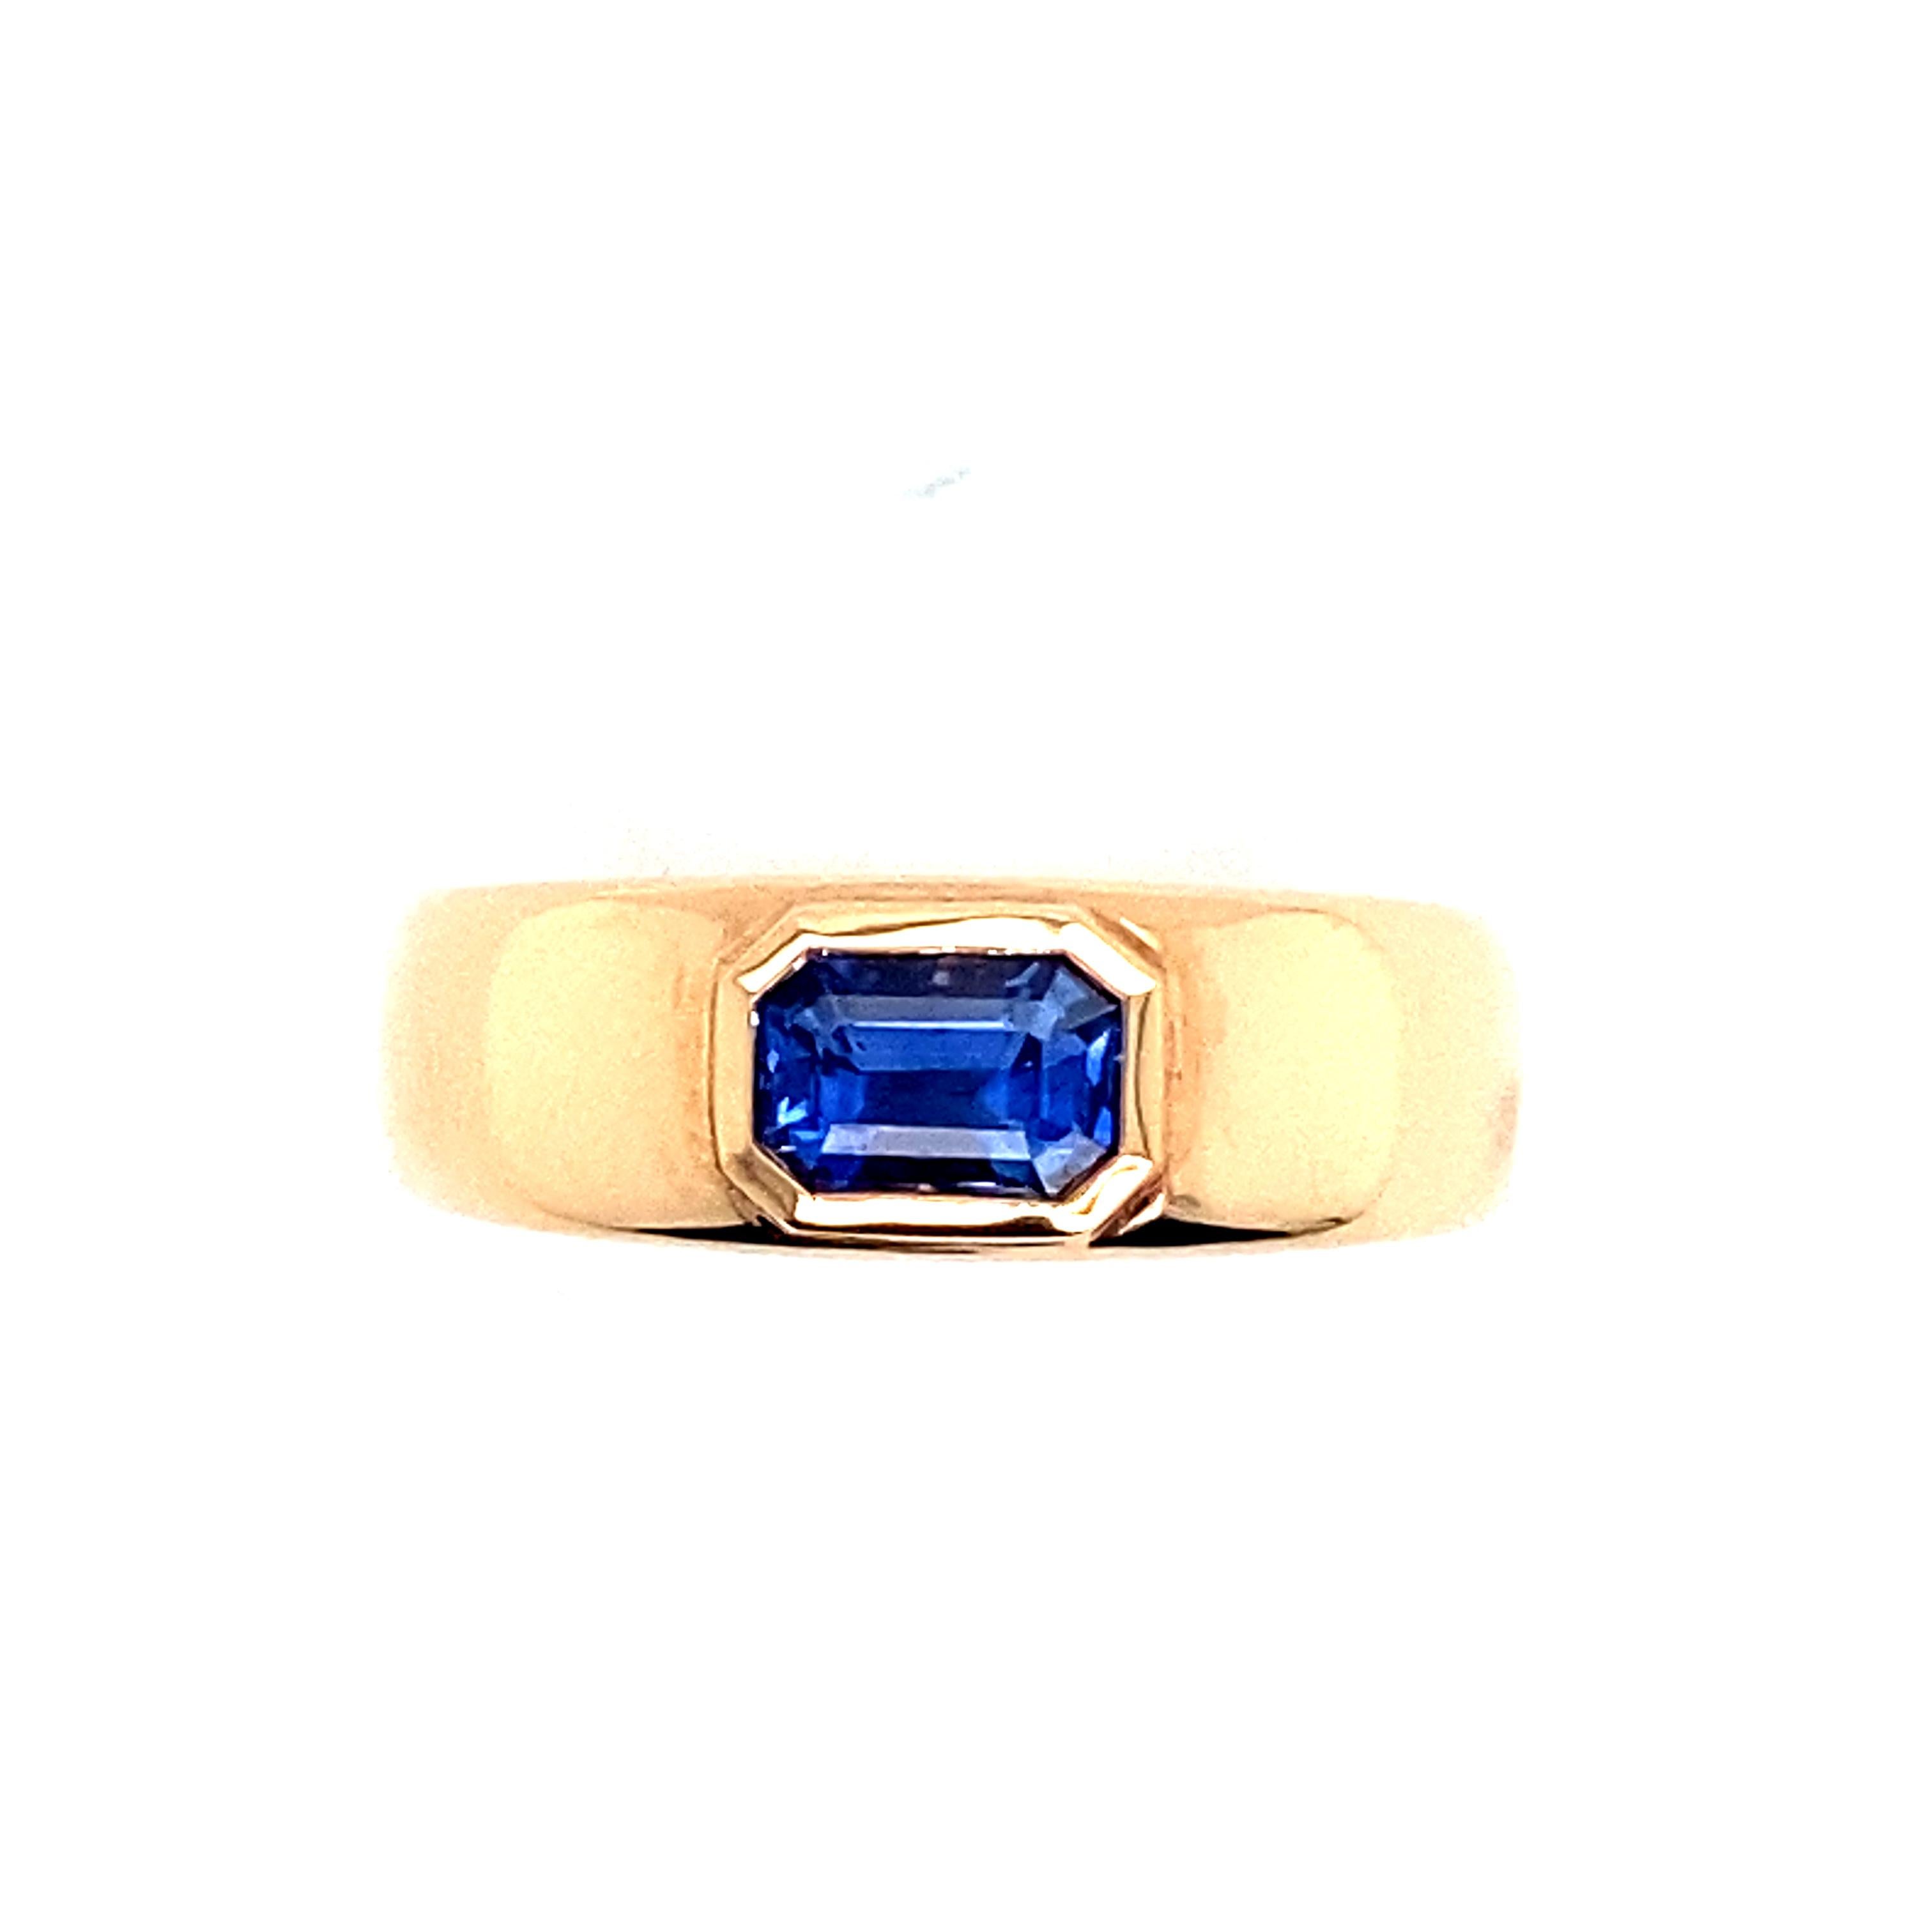 Welcome to our home, where we are delighted to present this magnificent 18K Rose Gold ring, showcasing a superb emerald-cut blue sapphire or RPC, a jewel of timeless elegance.

This 18K Rose Gold ring is an exceptional piece, designed to capture